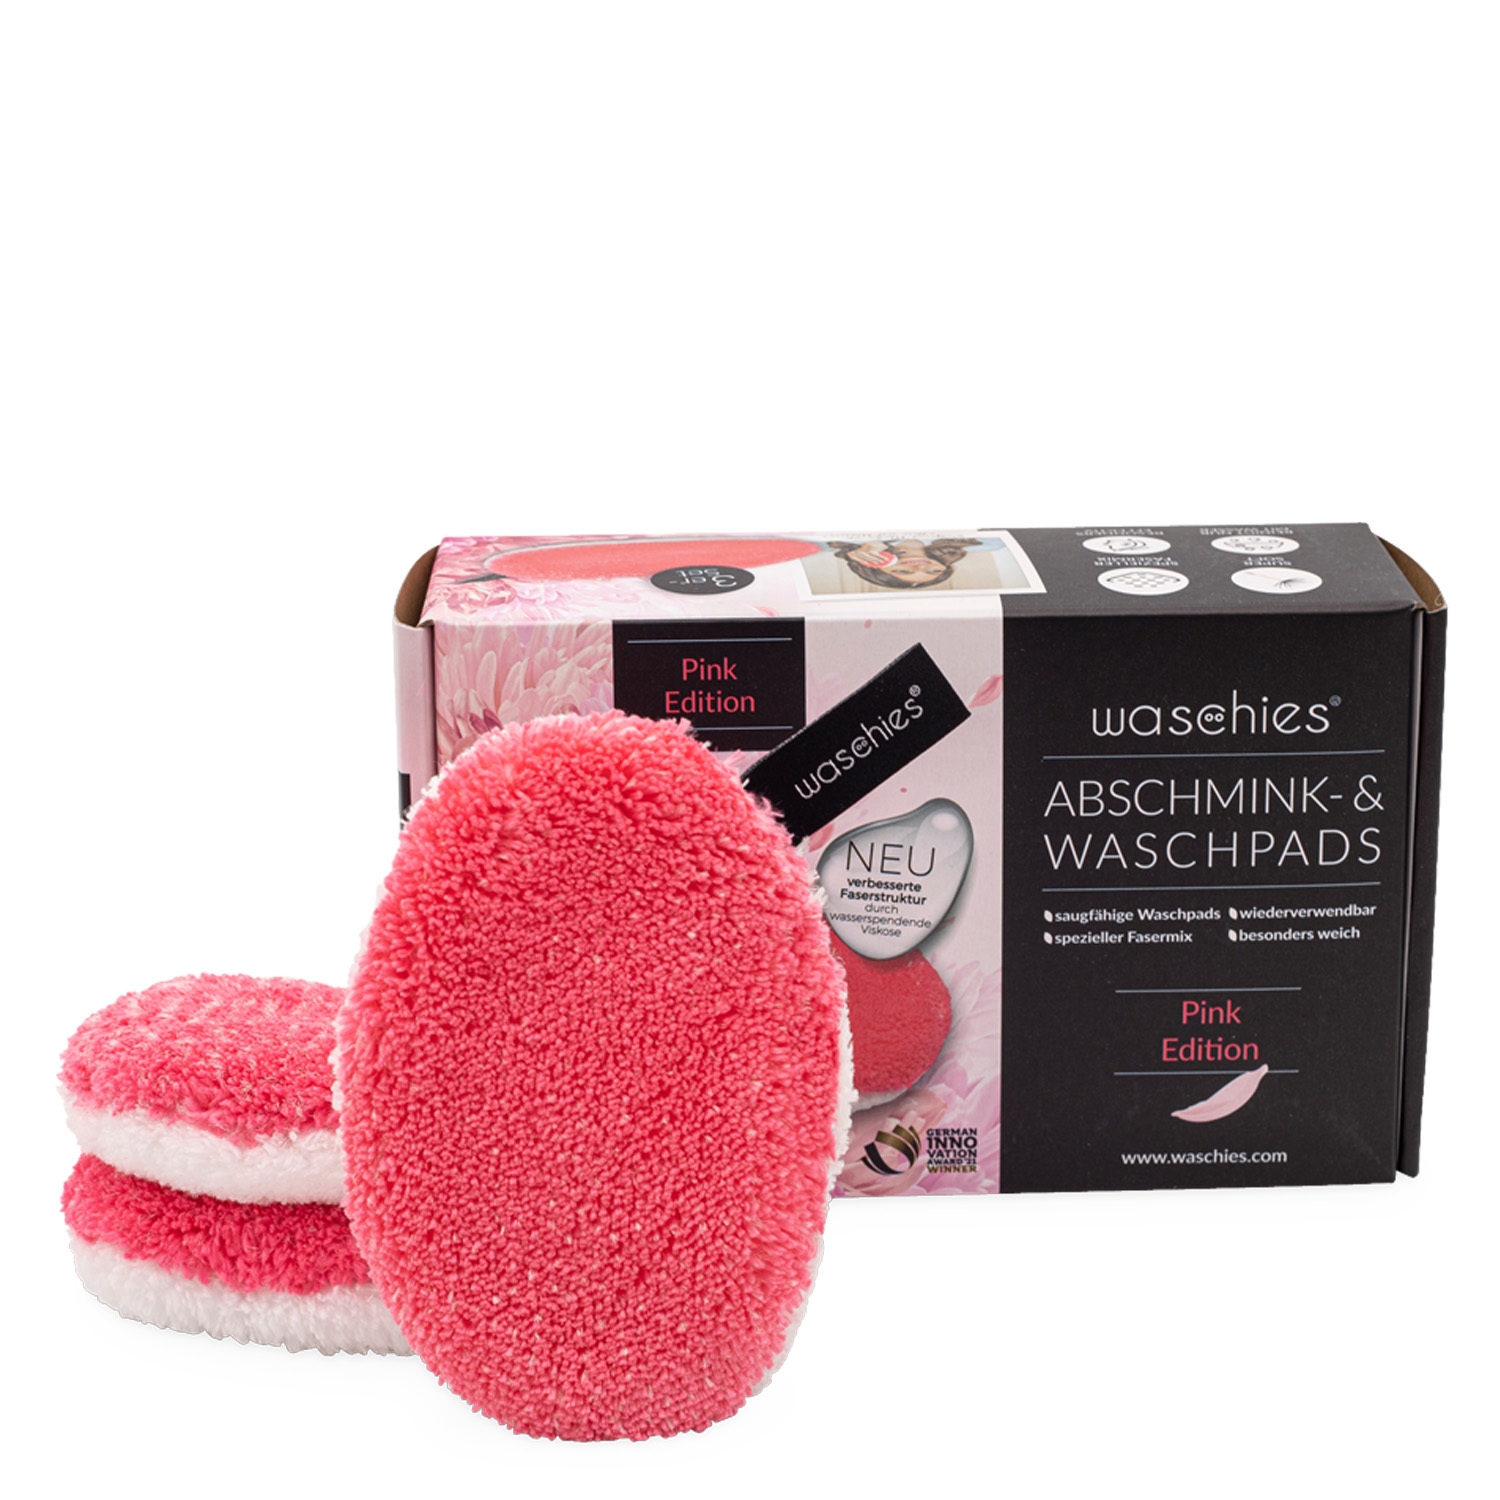 Product image from Waschies Faceline - Abschminkpads & Waschpads Pink Classic-Edition 3x